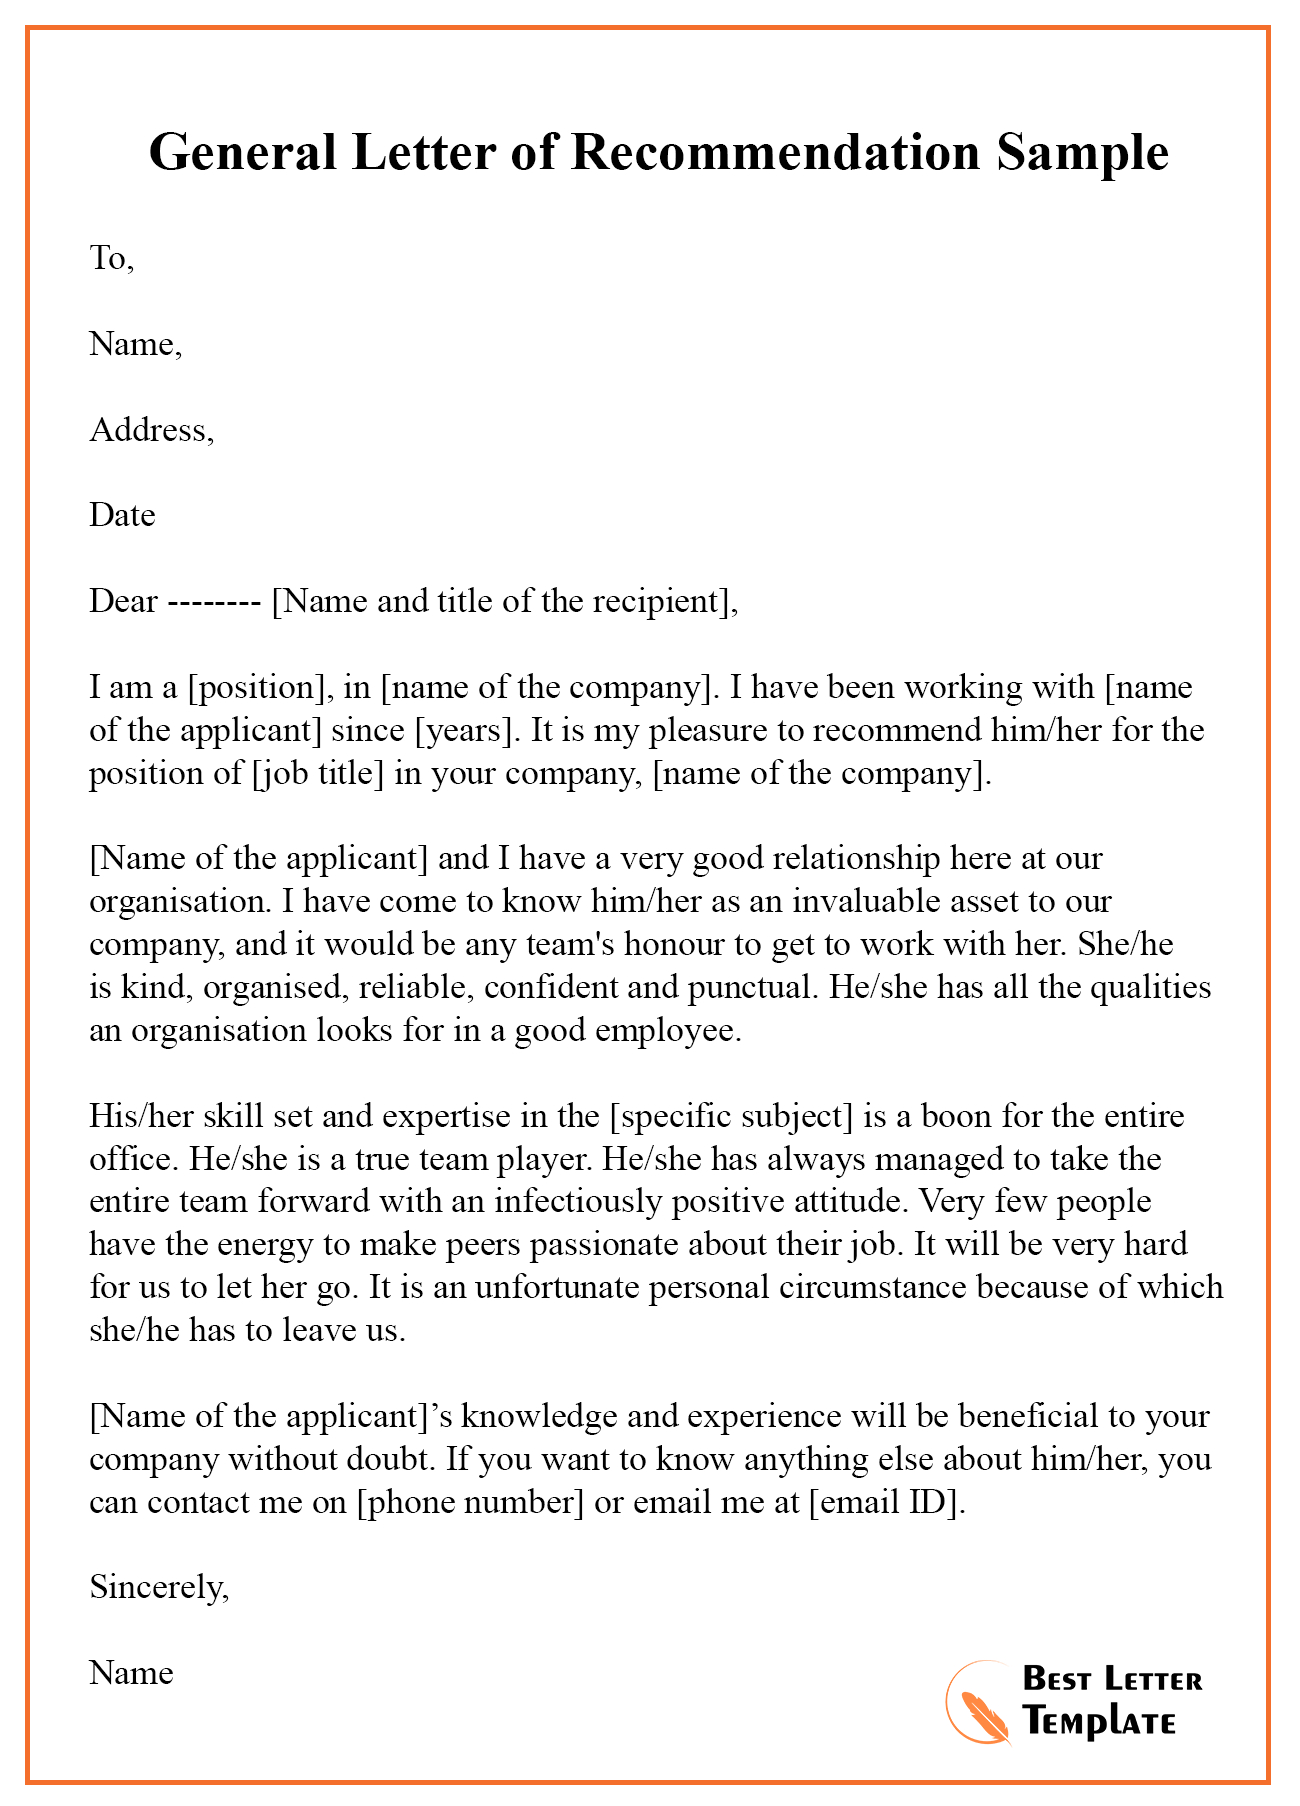 General Letter Of Recommendation Sample Best Letter Template with regard to sizing 1300 X 1806